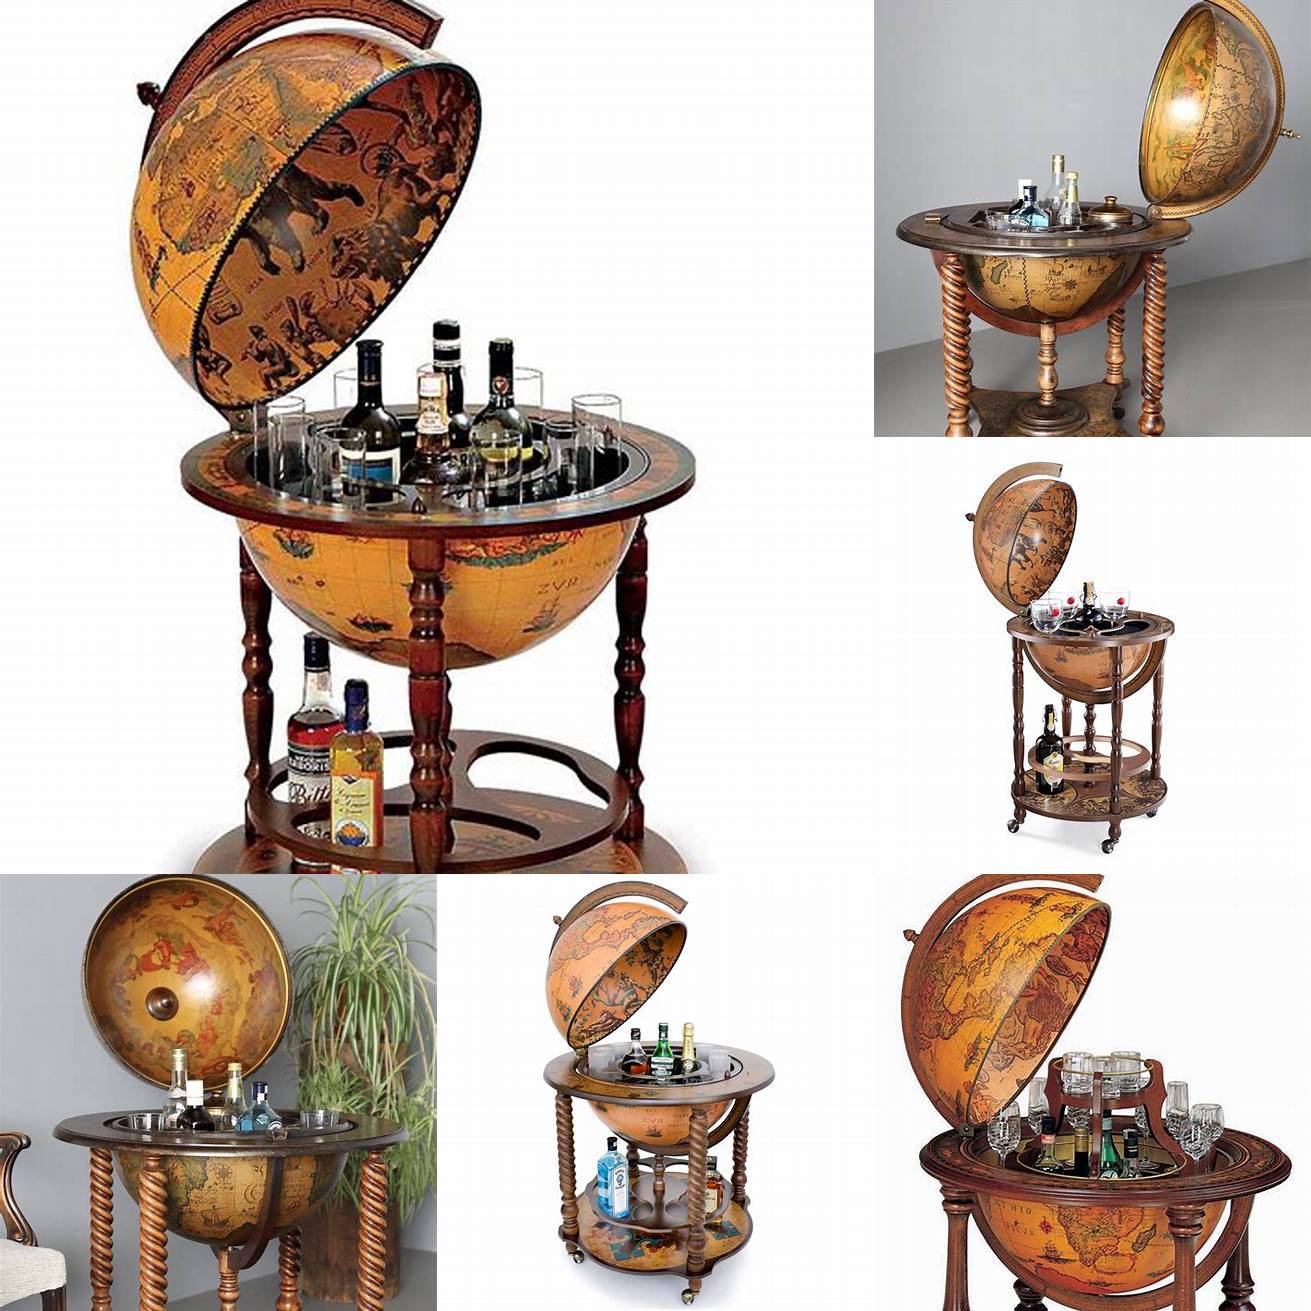 A globe bar with a vintage and retro feel can be a unique and functional piece of furniture in your home